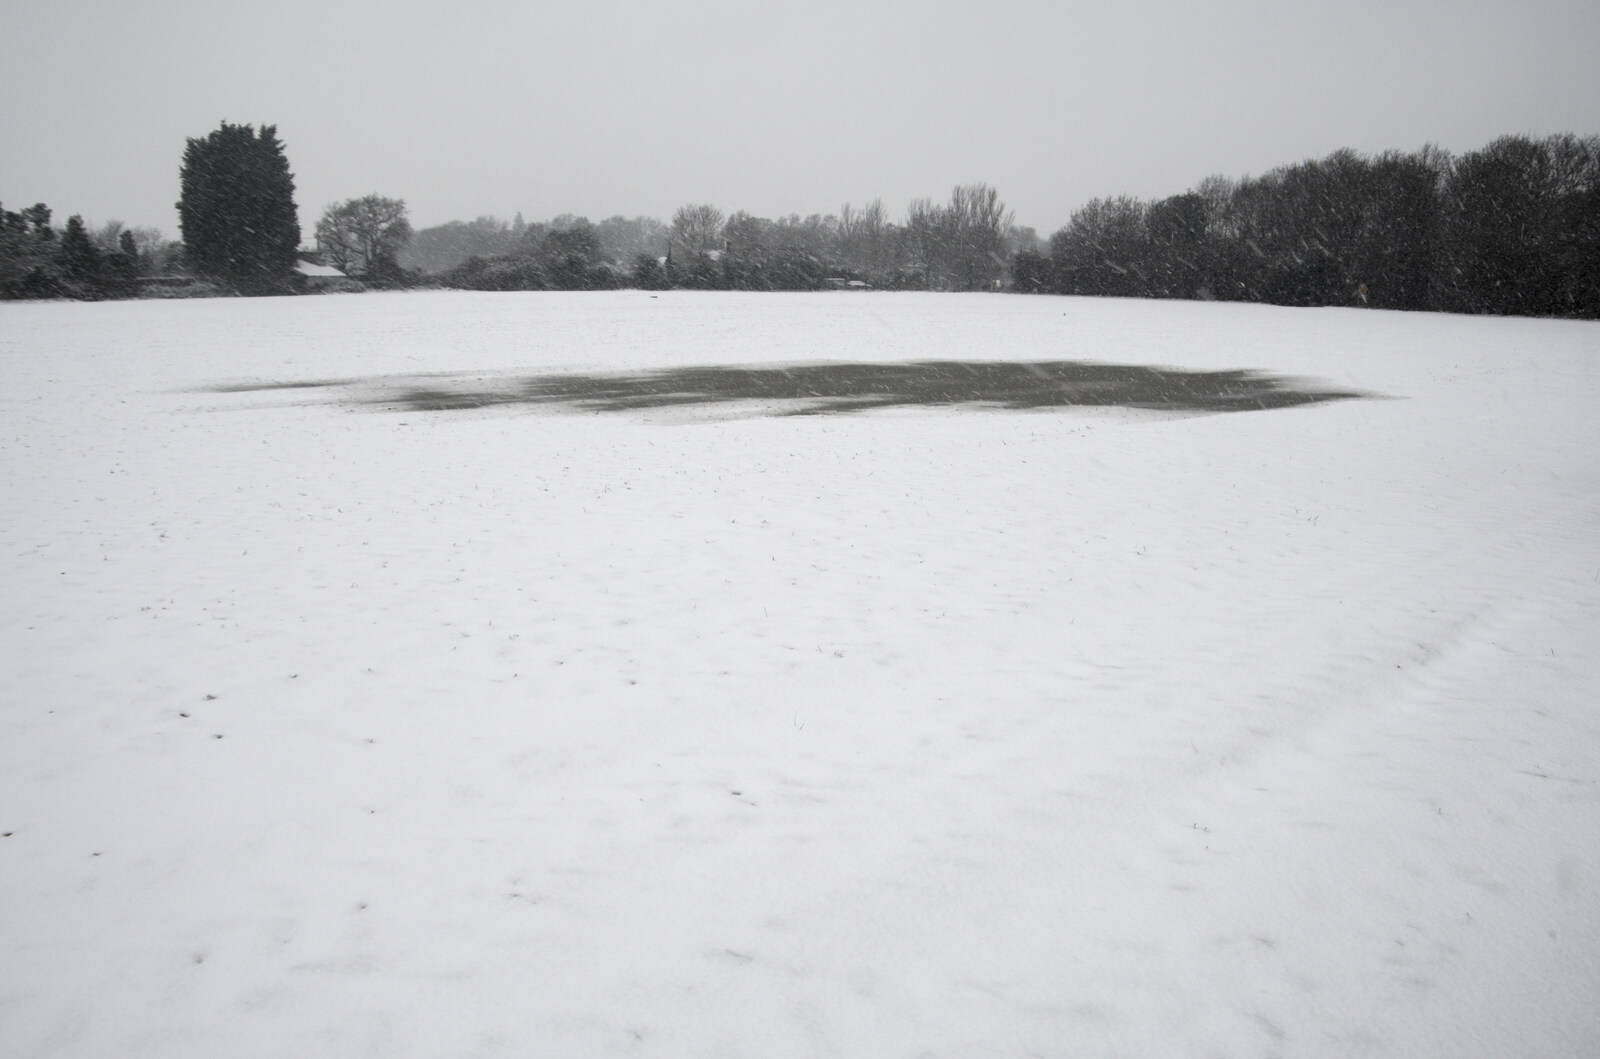 The side field is getting snowed over from A Snowy Morning, Diss, Norfolk - 16th January 2021